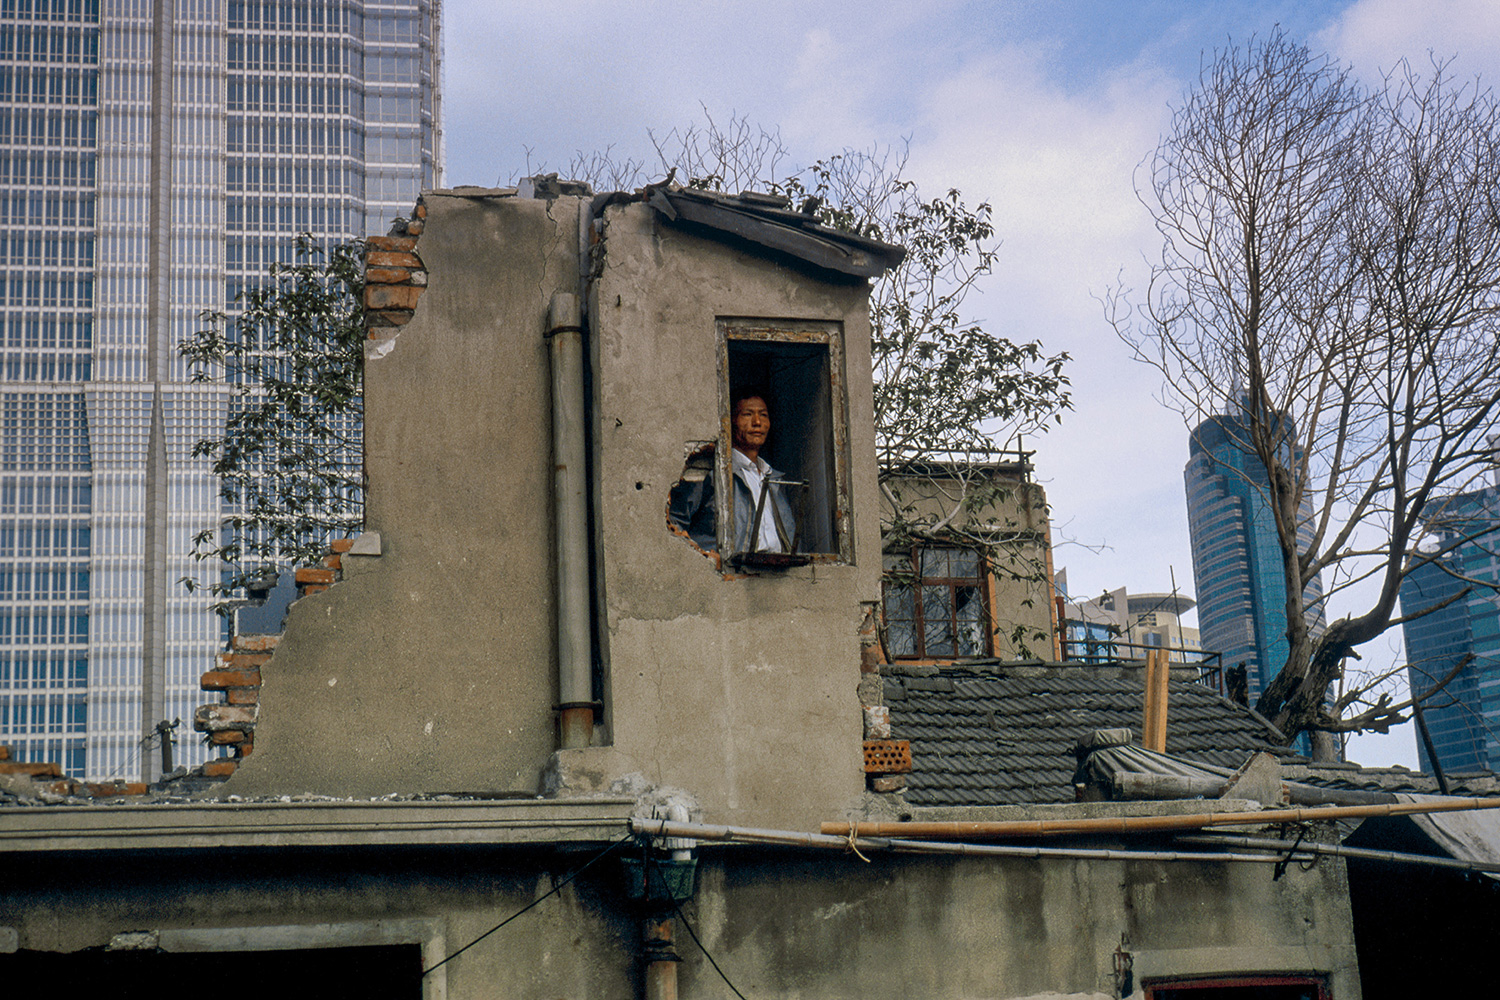 A resident refuses to leave his home at the base of the Jin Mao Tower, 1998.